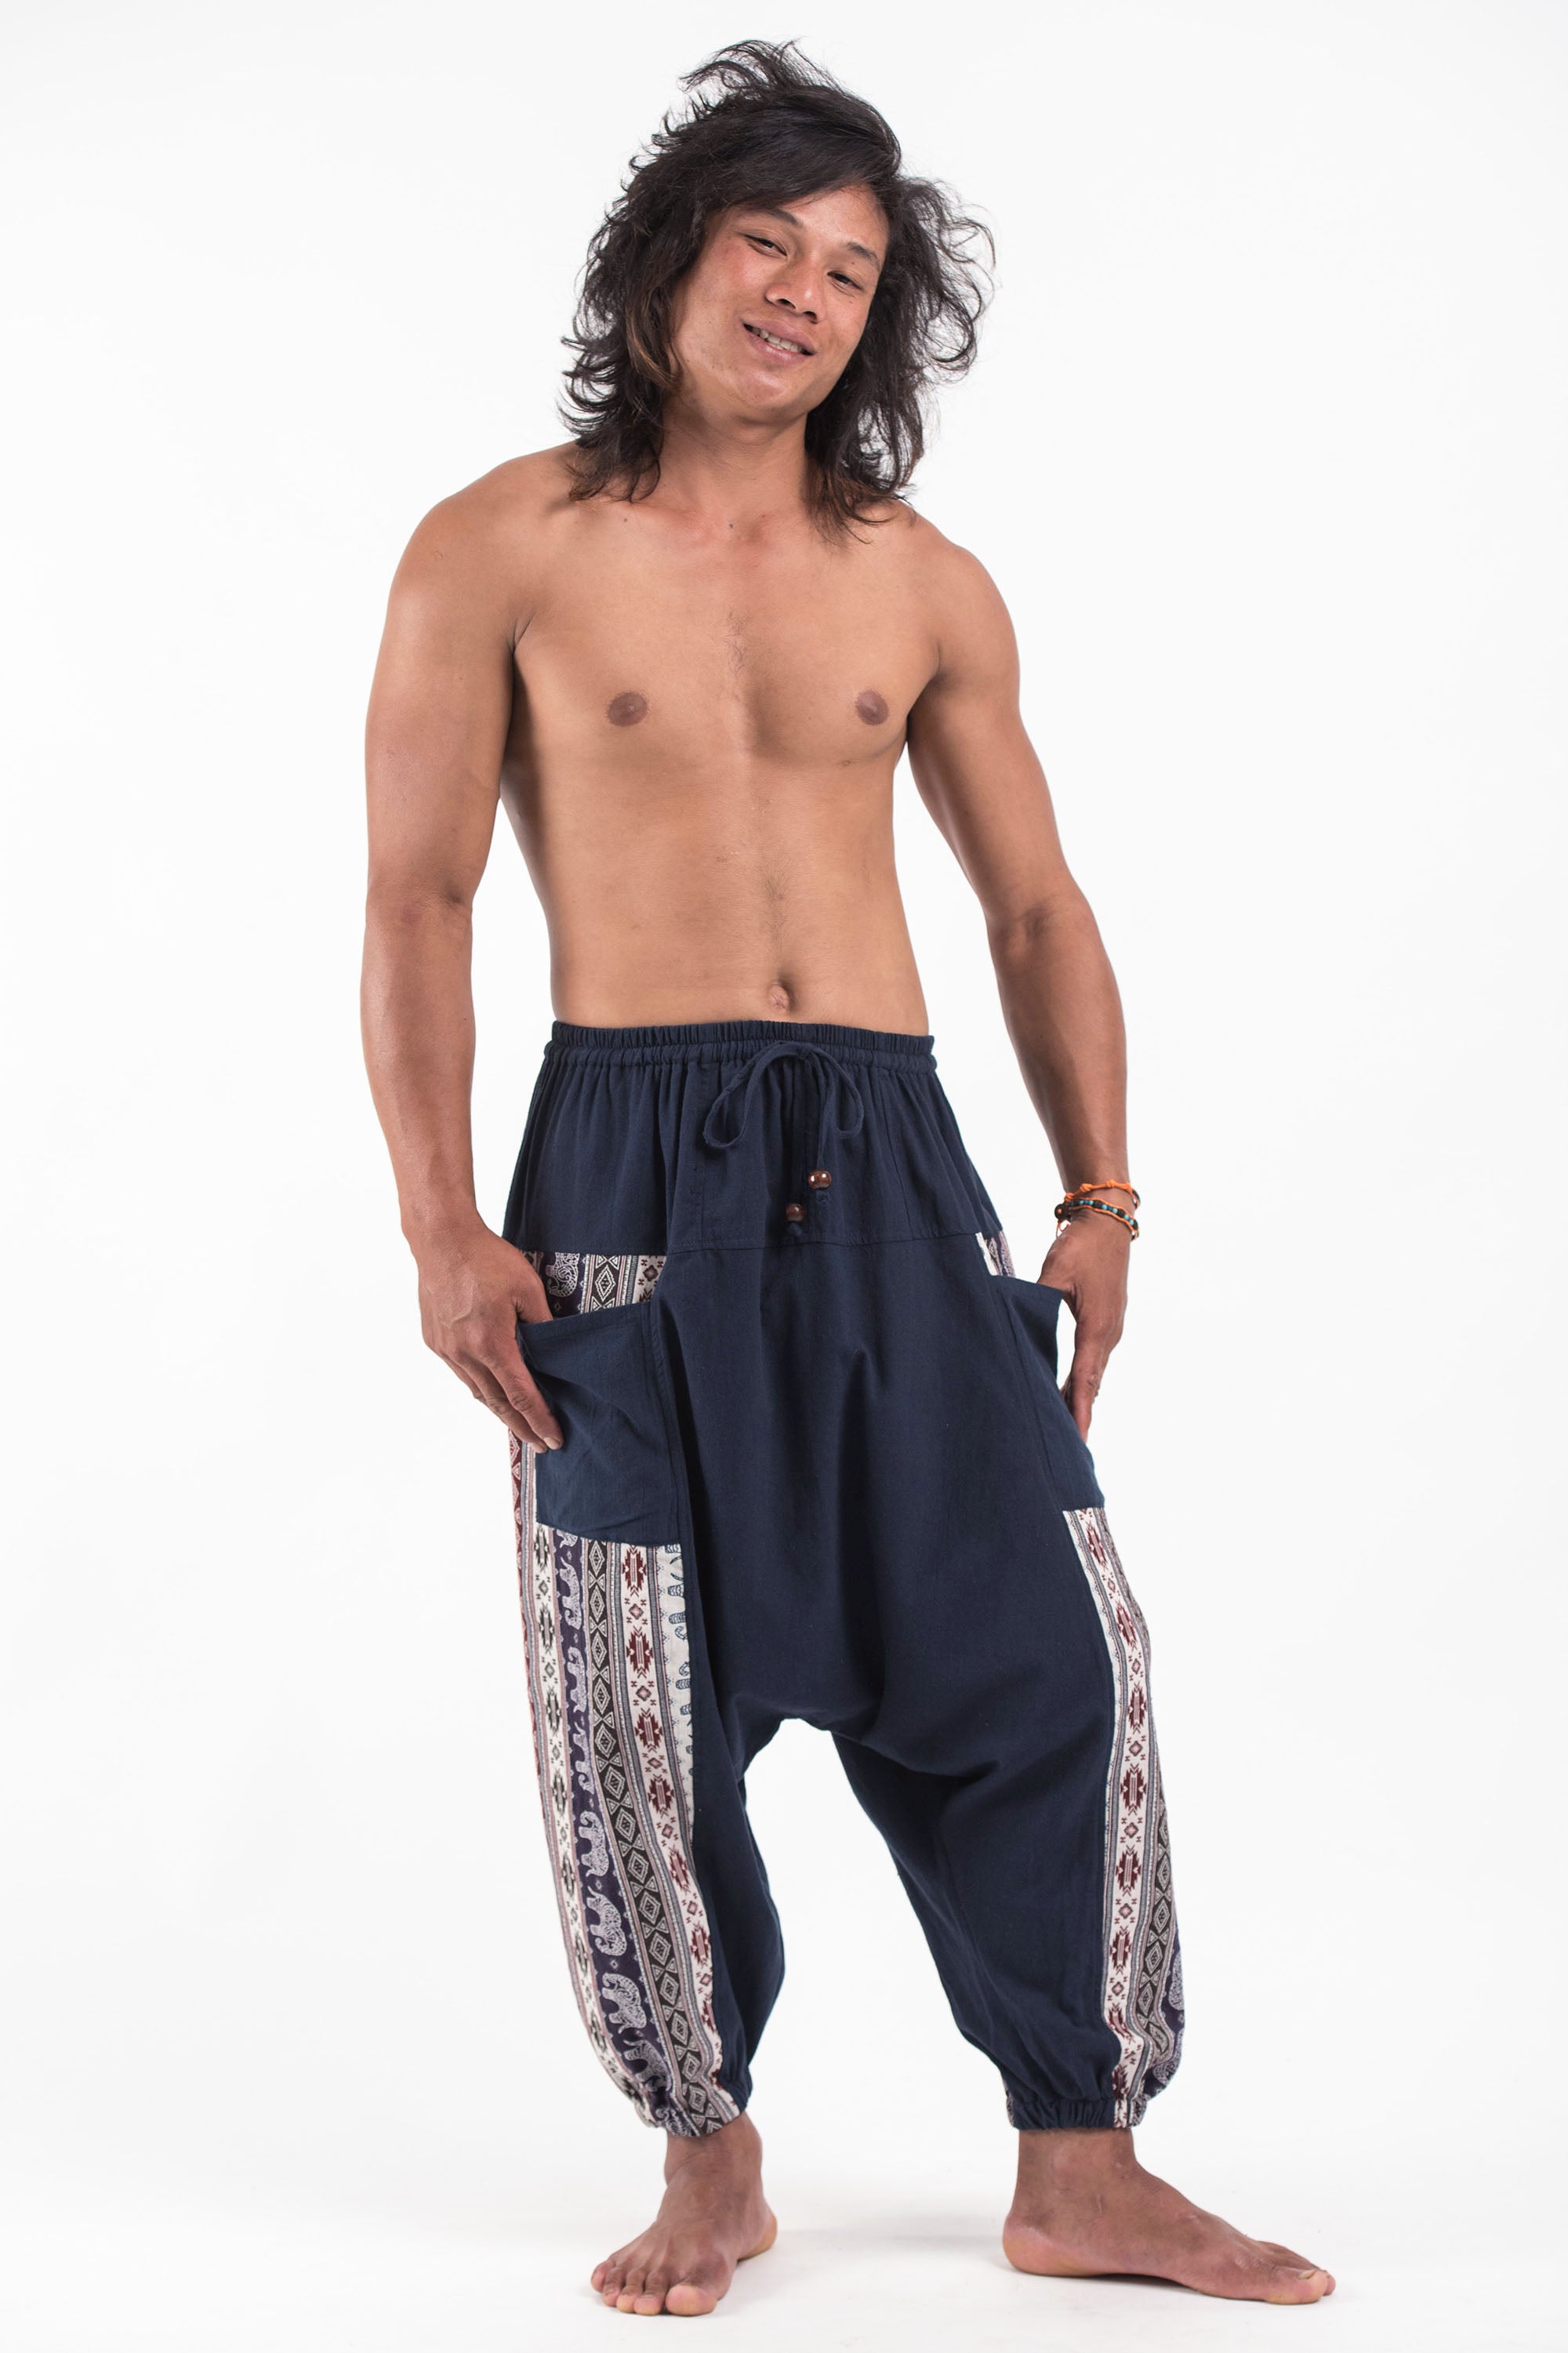 Bohemian Style Harem Pants For Women And Men Wide Leg Print, Ethnic Pants,  2023 Fashion, Summer Loose Fit, Hippie Trousers In Big Size From Suiheren,  $26.63 | DHgate.Com